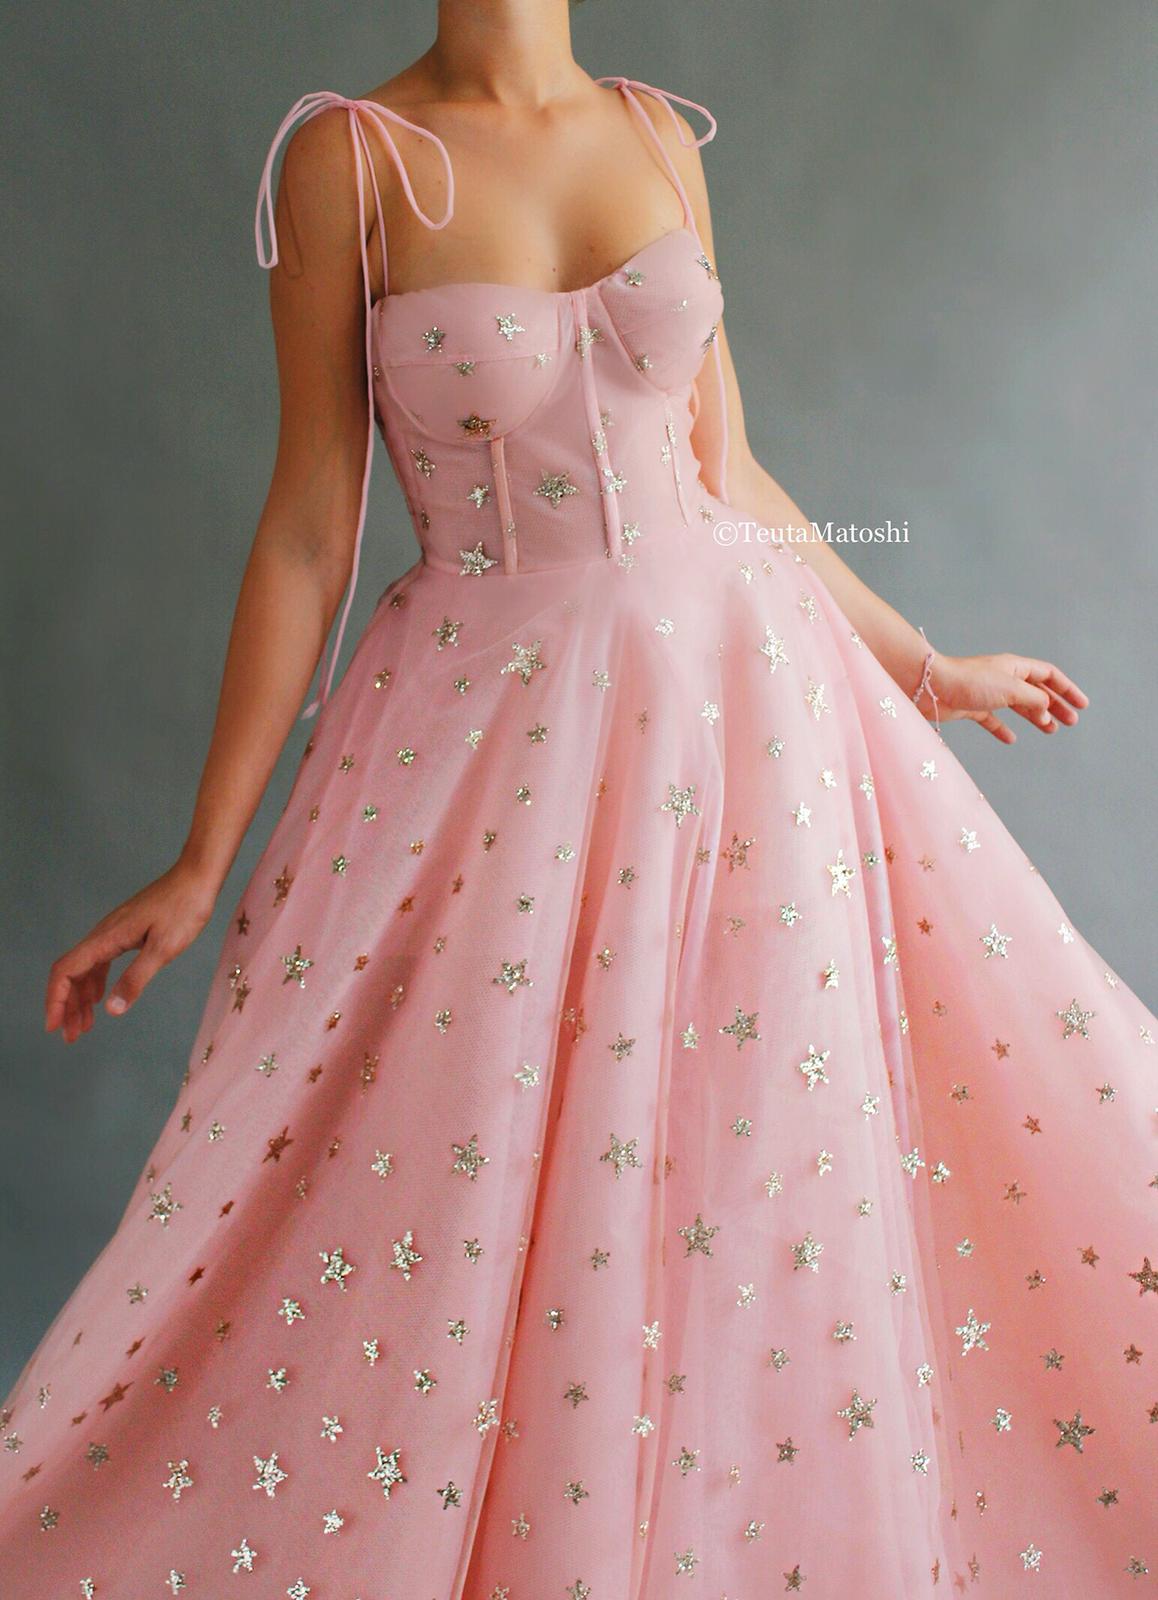 Pink A-Line dress with starry fabric and spaghetti straps